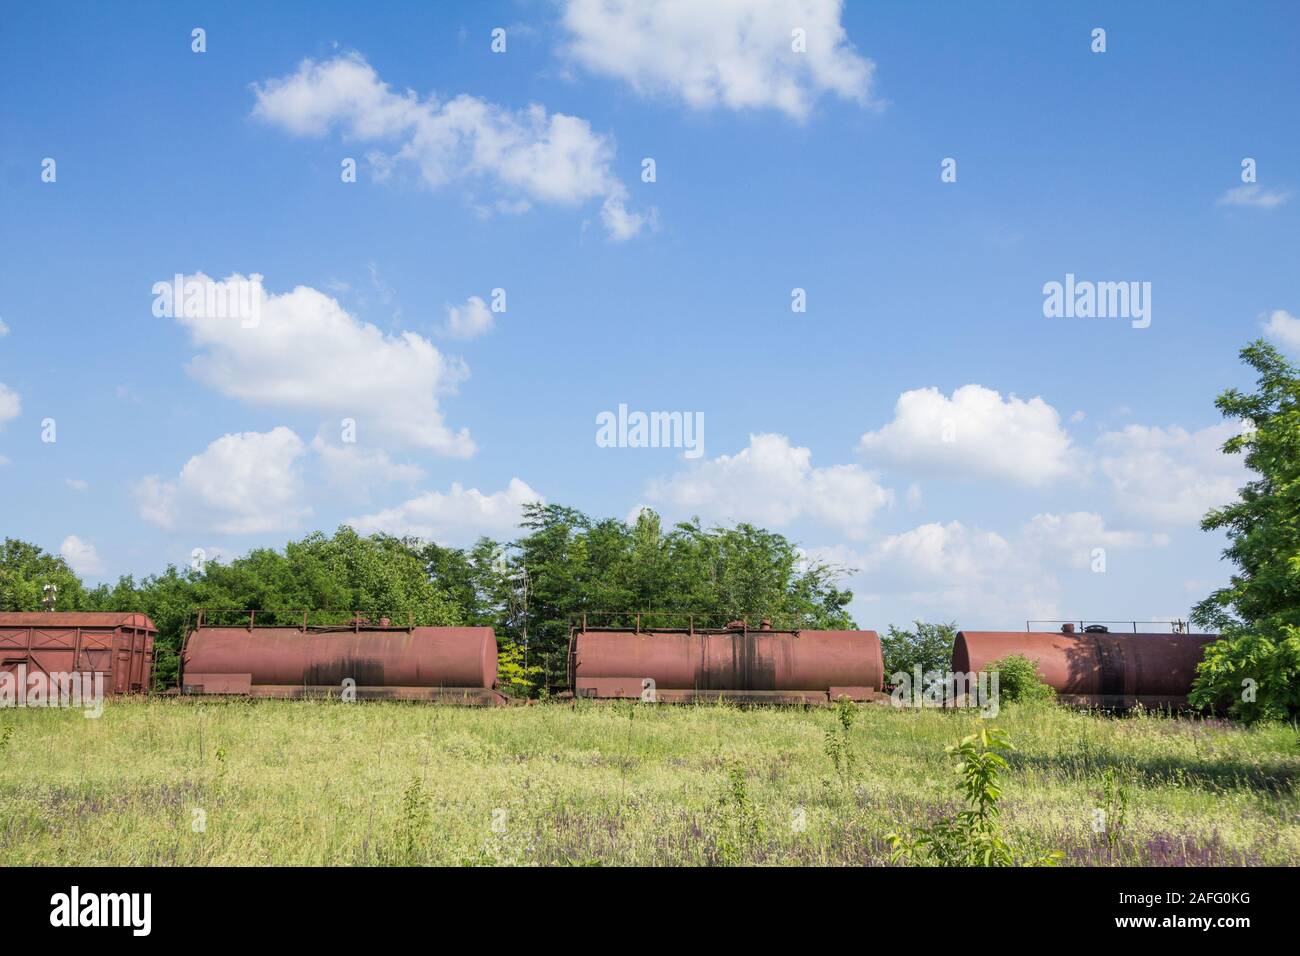 Abandoned wagons, old and rusty tank cars that used to carry oil, on display on a decommissioned railway train track that was left unused since the ec Stock Photo